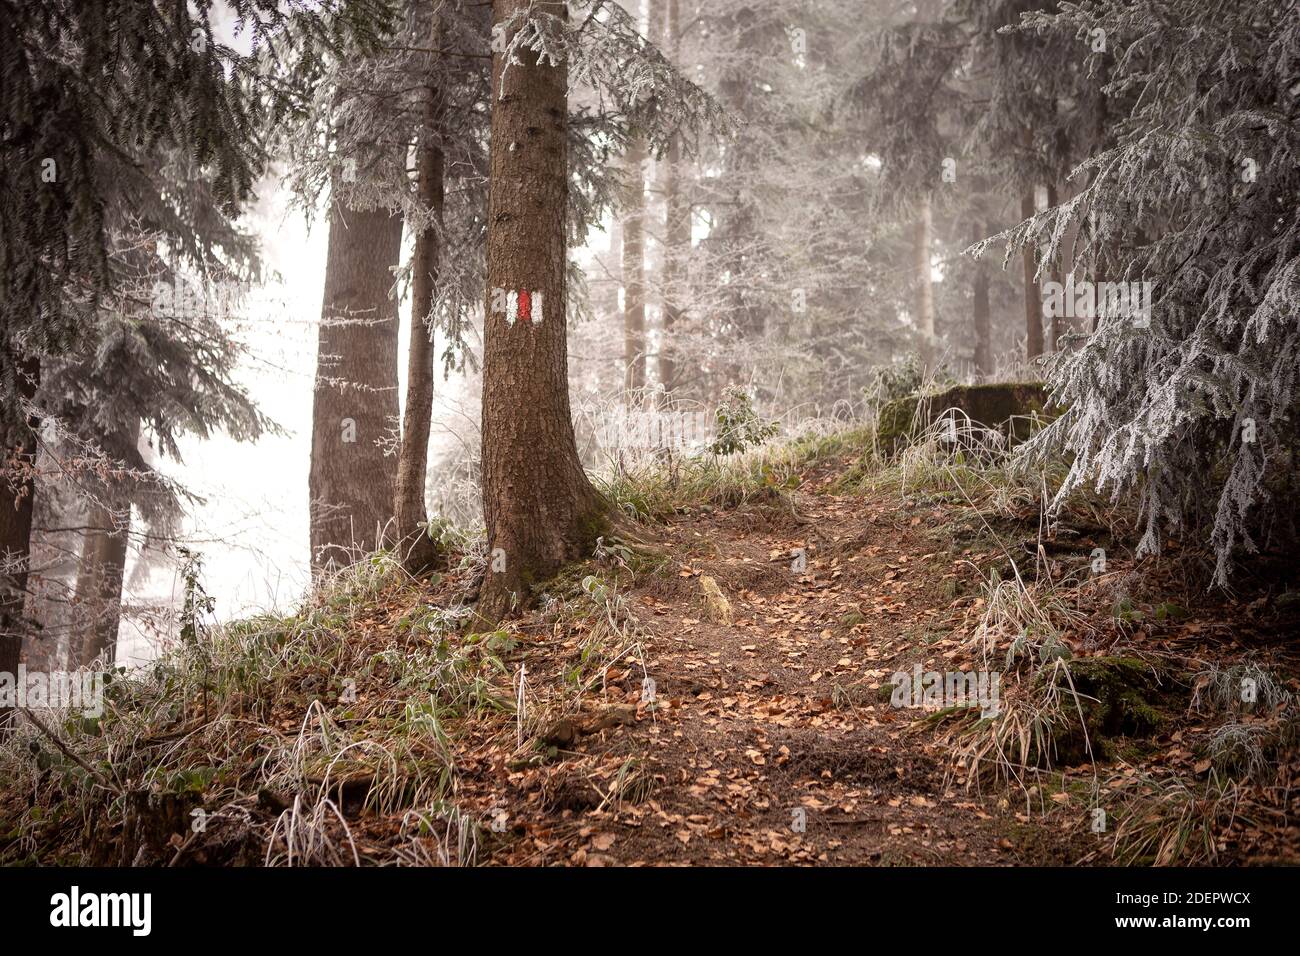 Red mark on tree trunk, trail sign. Wander path in forest in mountains, alps in autumn with rime ice on trees and fog. Stock Photo